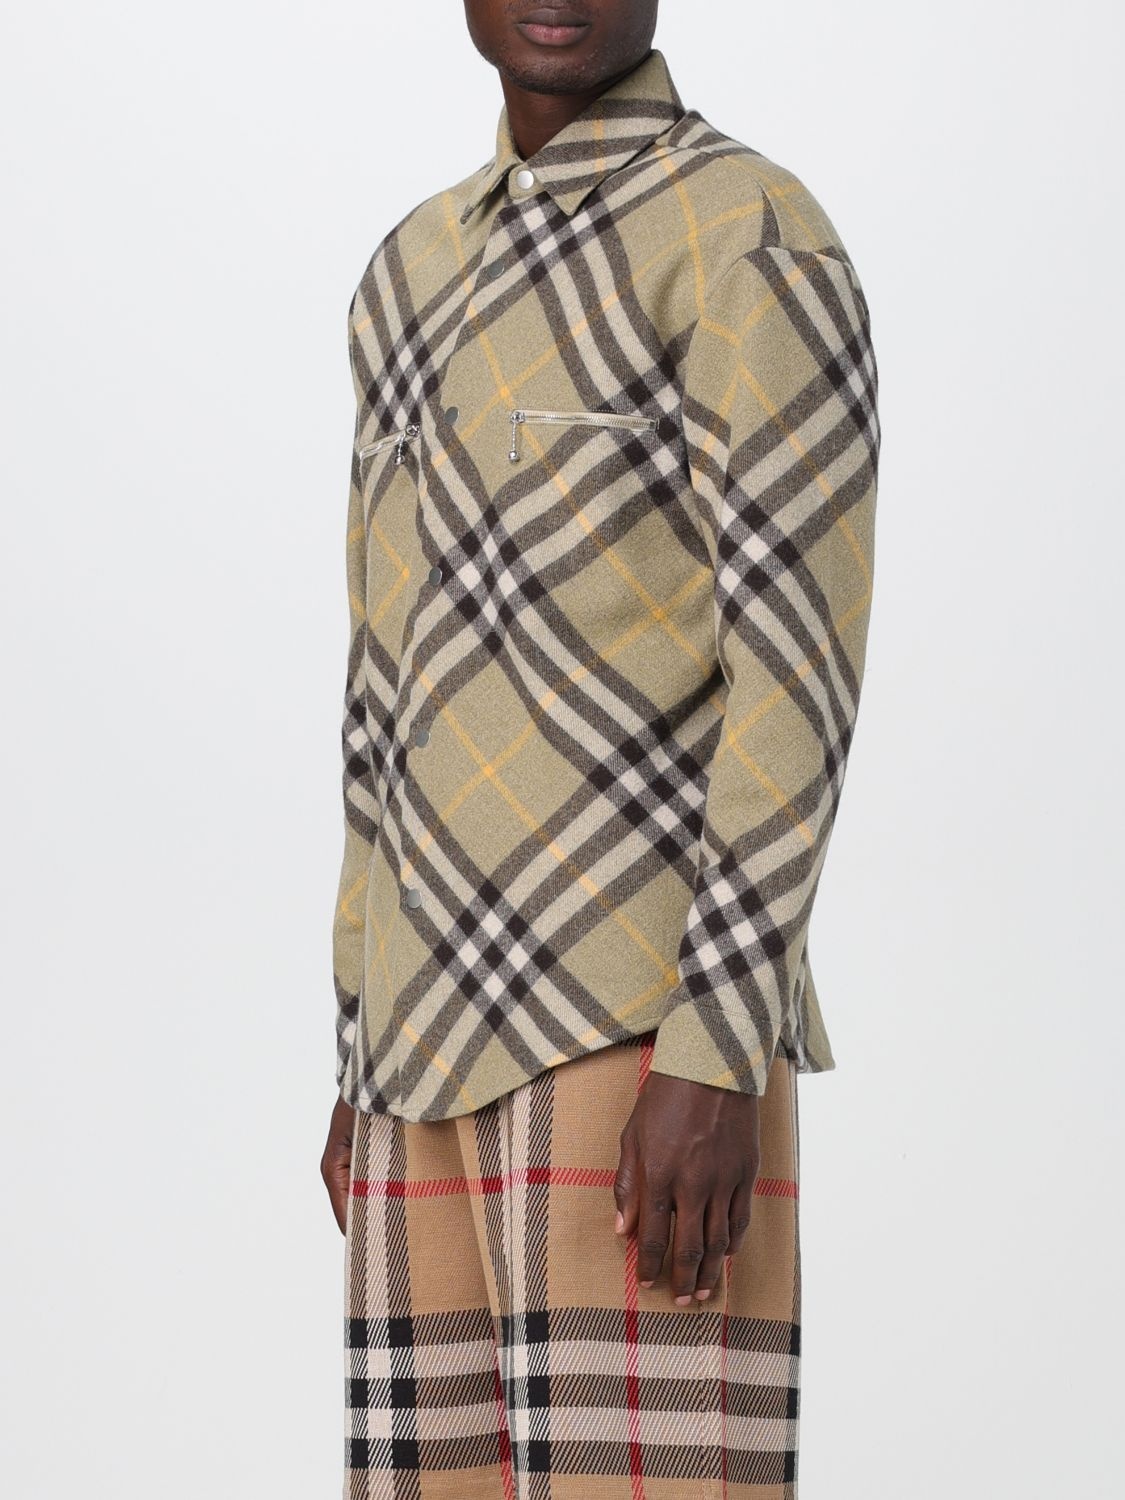 Burberry shirt in check pattern wool blend - 4